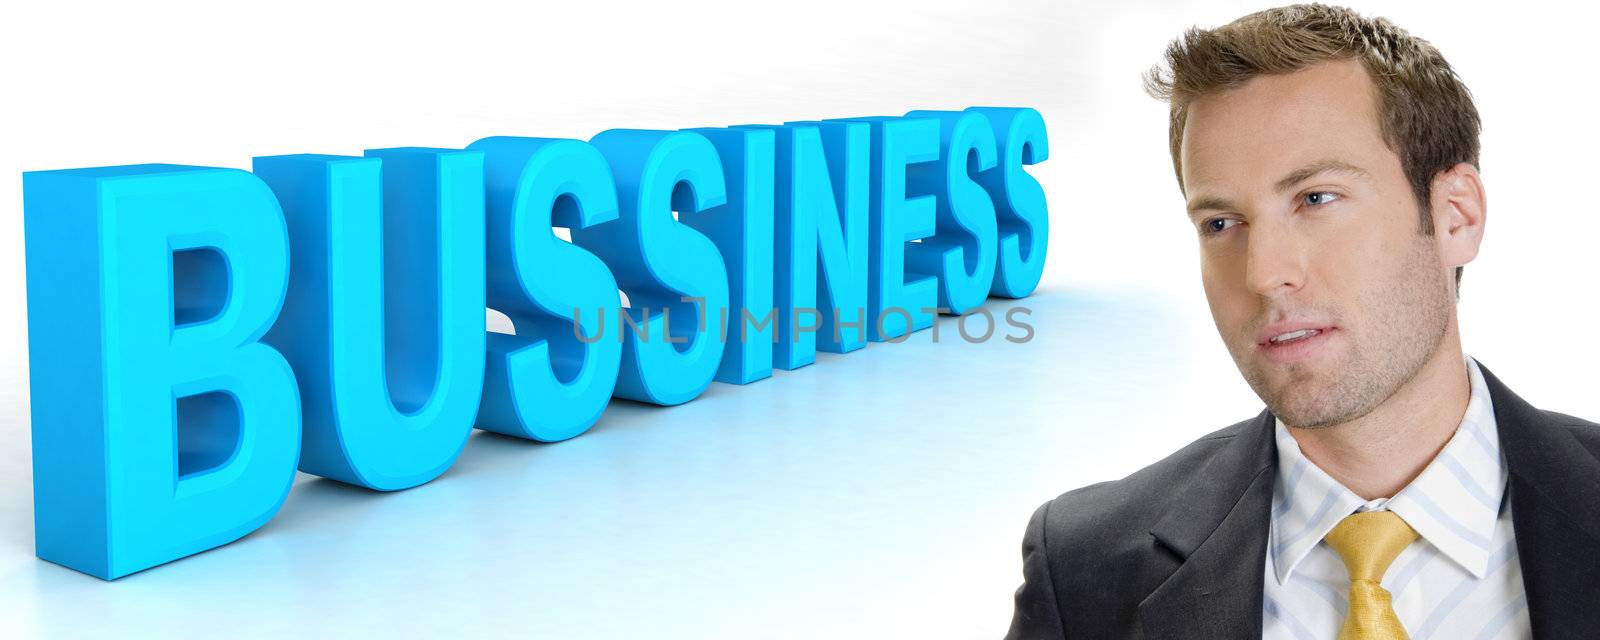 handsome man and three dimensional business word on an isolated white background